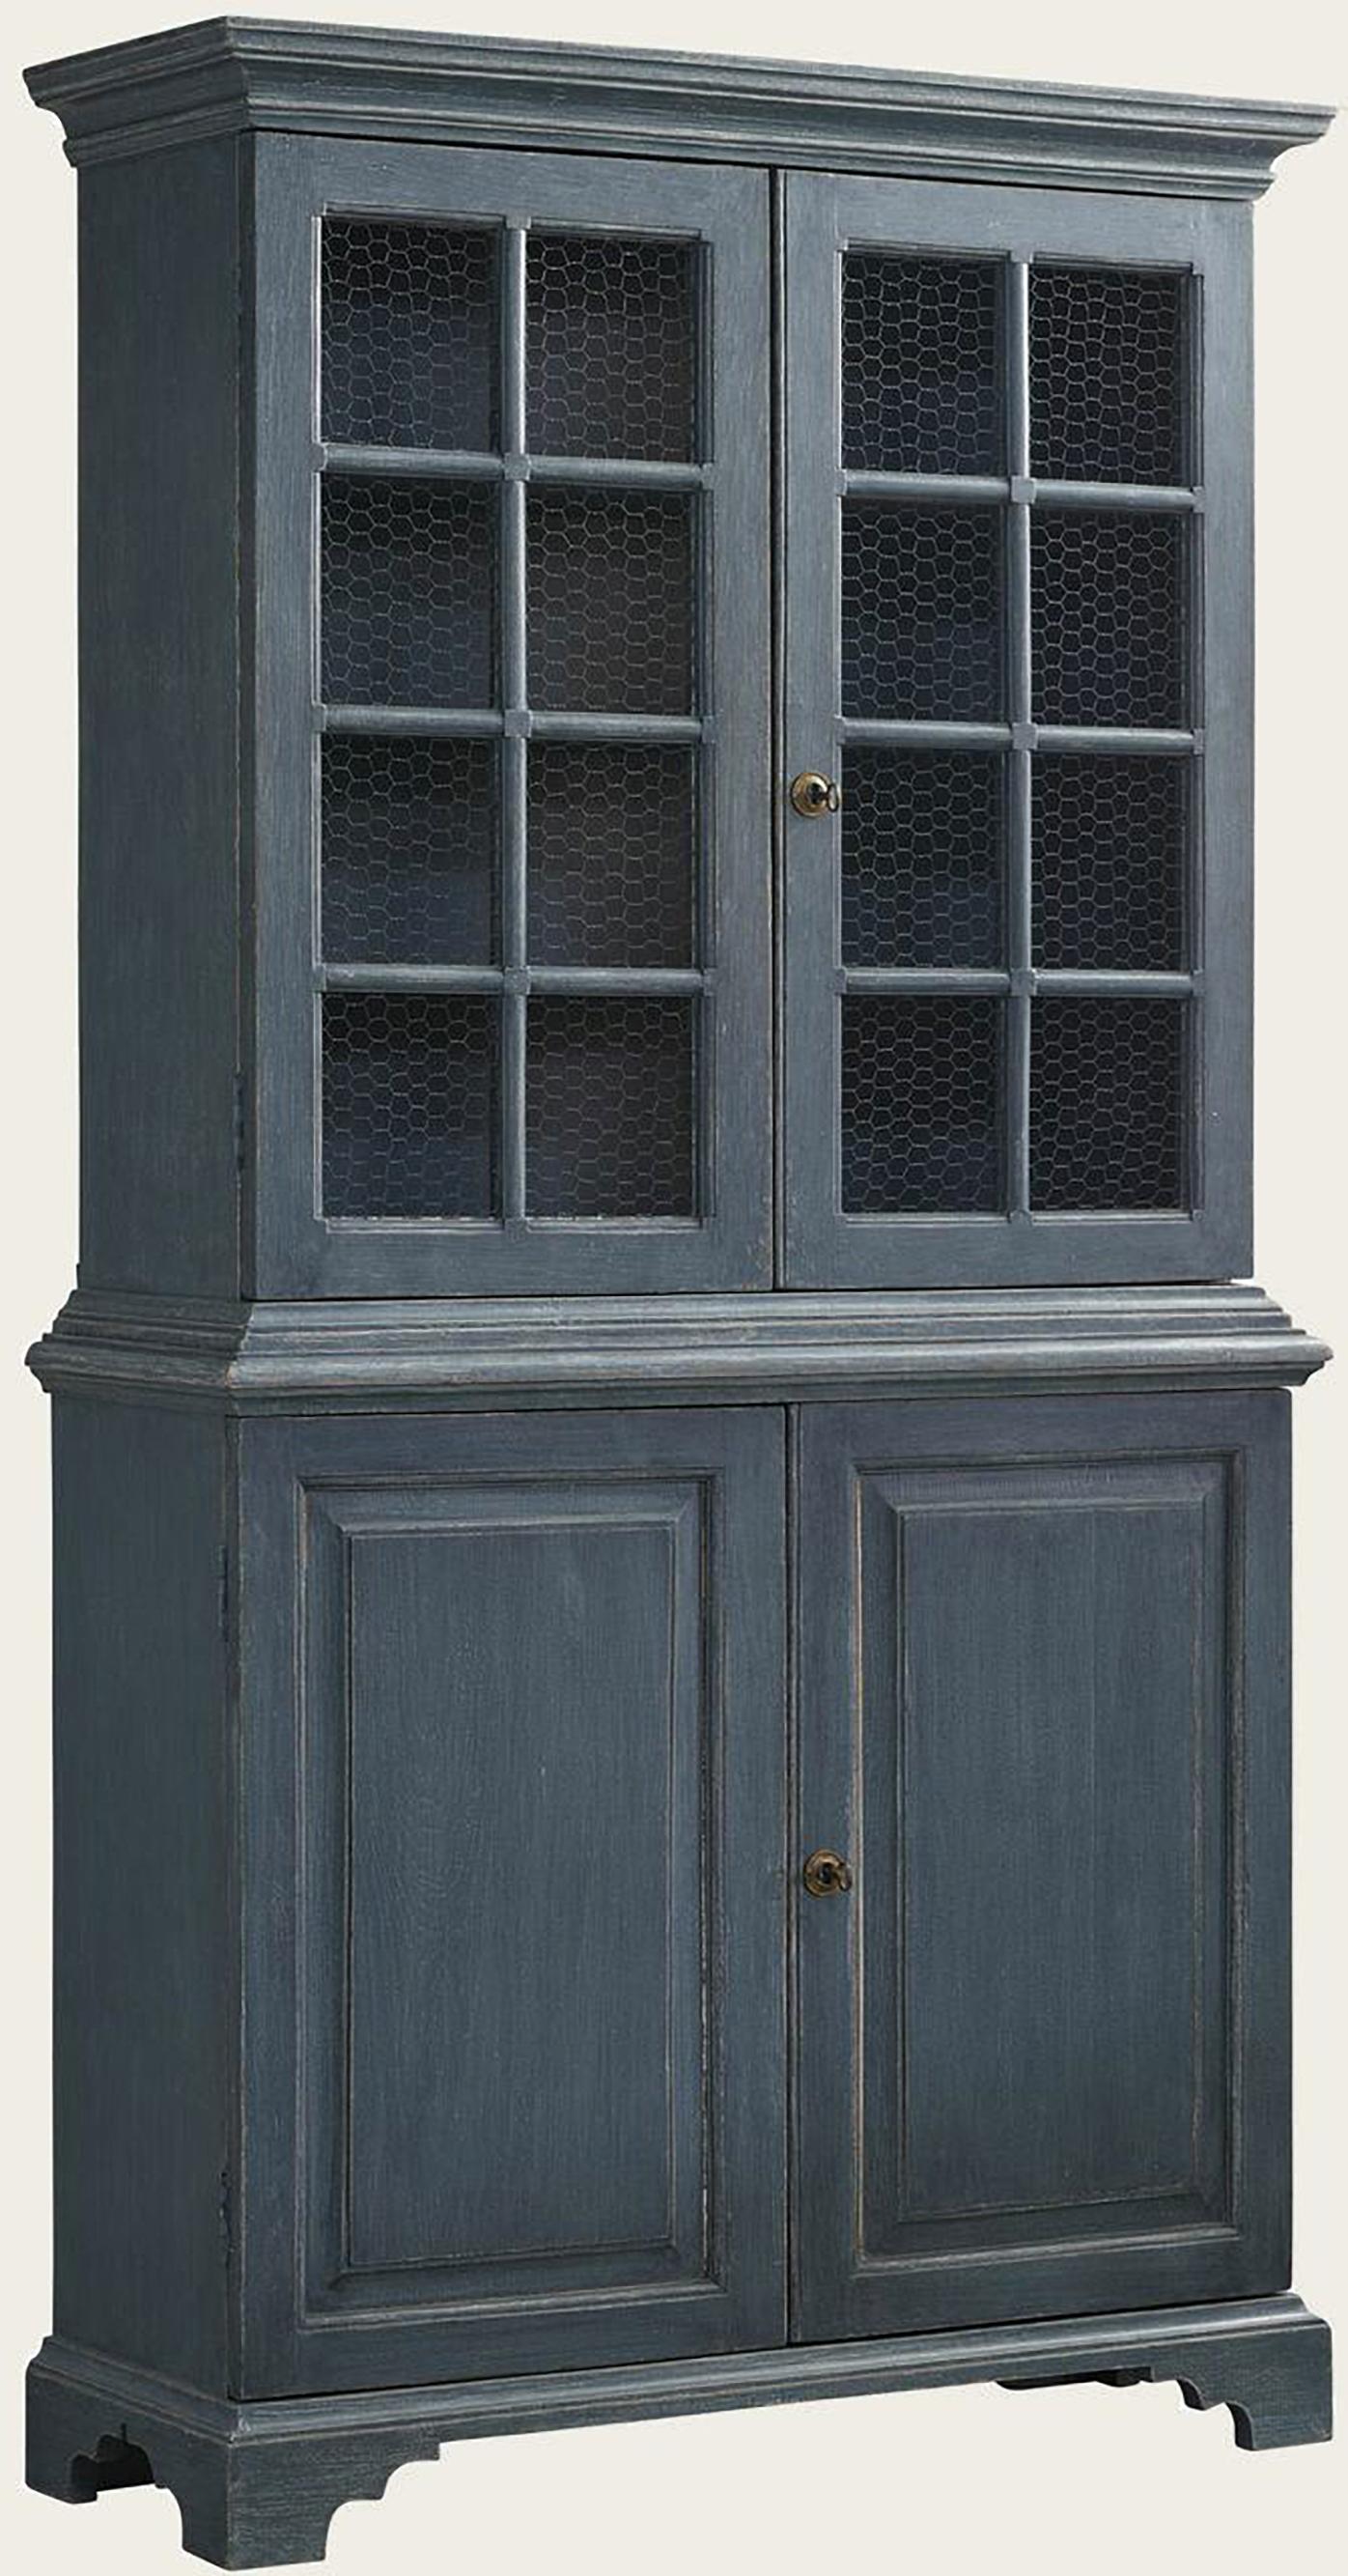 Beautiful pair of blue painted, Gustavian style Bookcases with charming chicken wire in the cabinet doors. The distressed patina has been expertly done and gives an unparalleled warmth. These hand-painted and hand-carved bookcases are wonderful